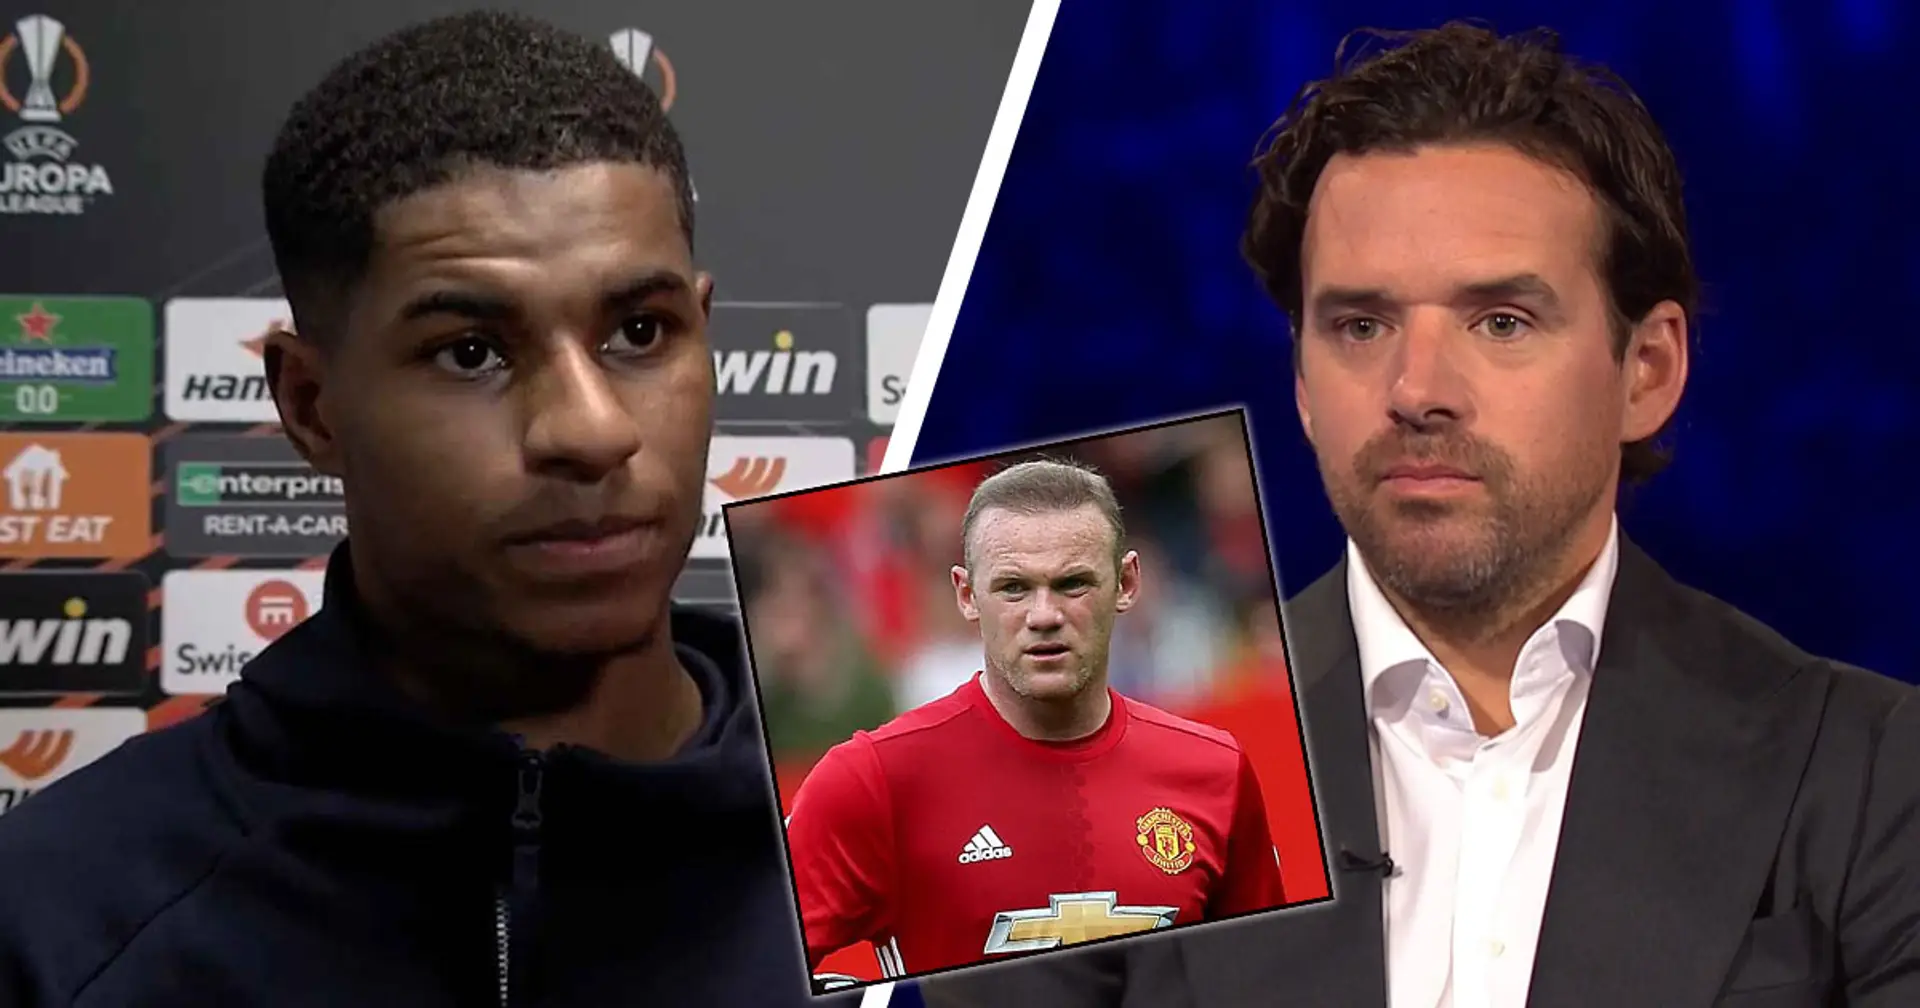 Owen Hargreaves: ‘Rashford could have 250 goals for Man United at the end of his career’